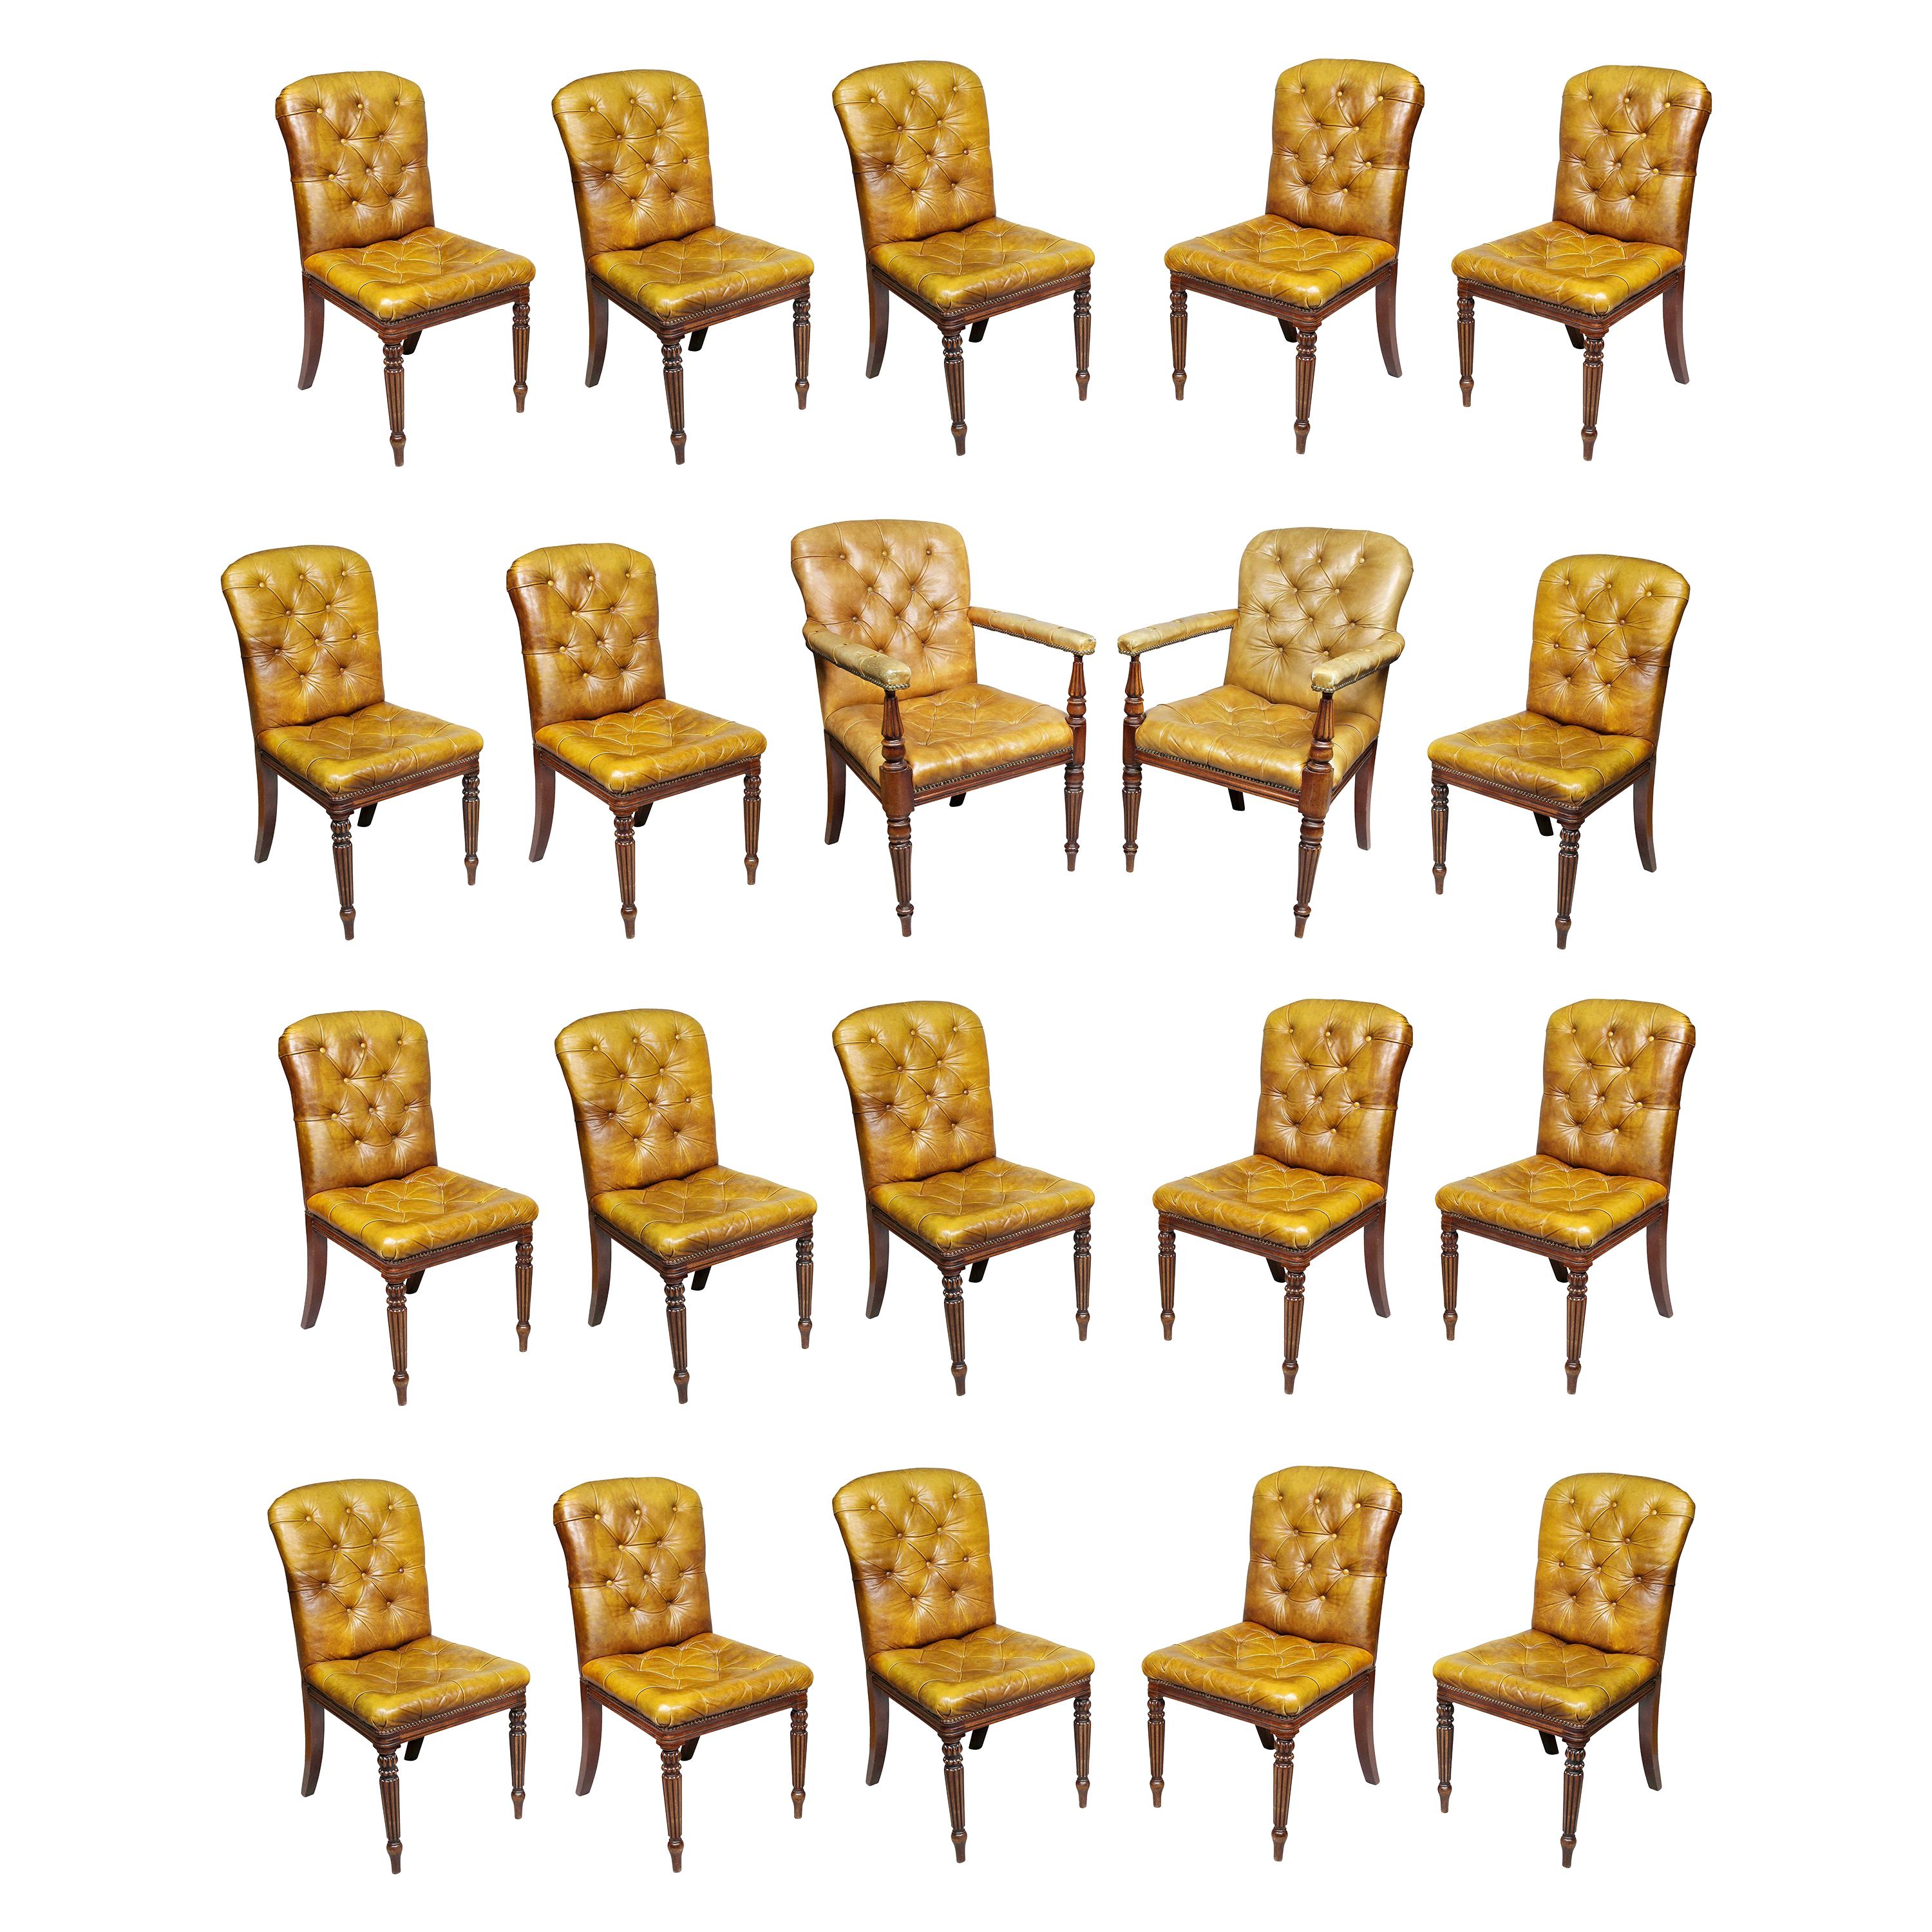 Set of Twenty Regency Style Mahogany Dining Room / Conference Room Chairs